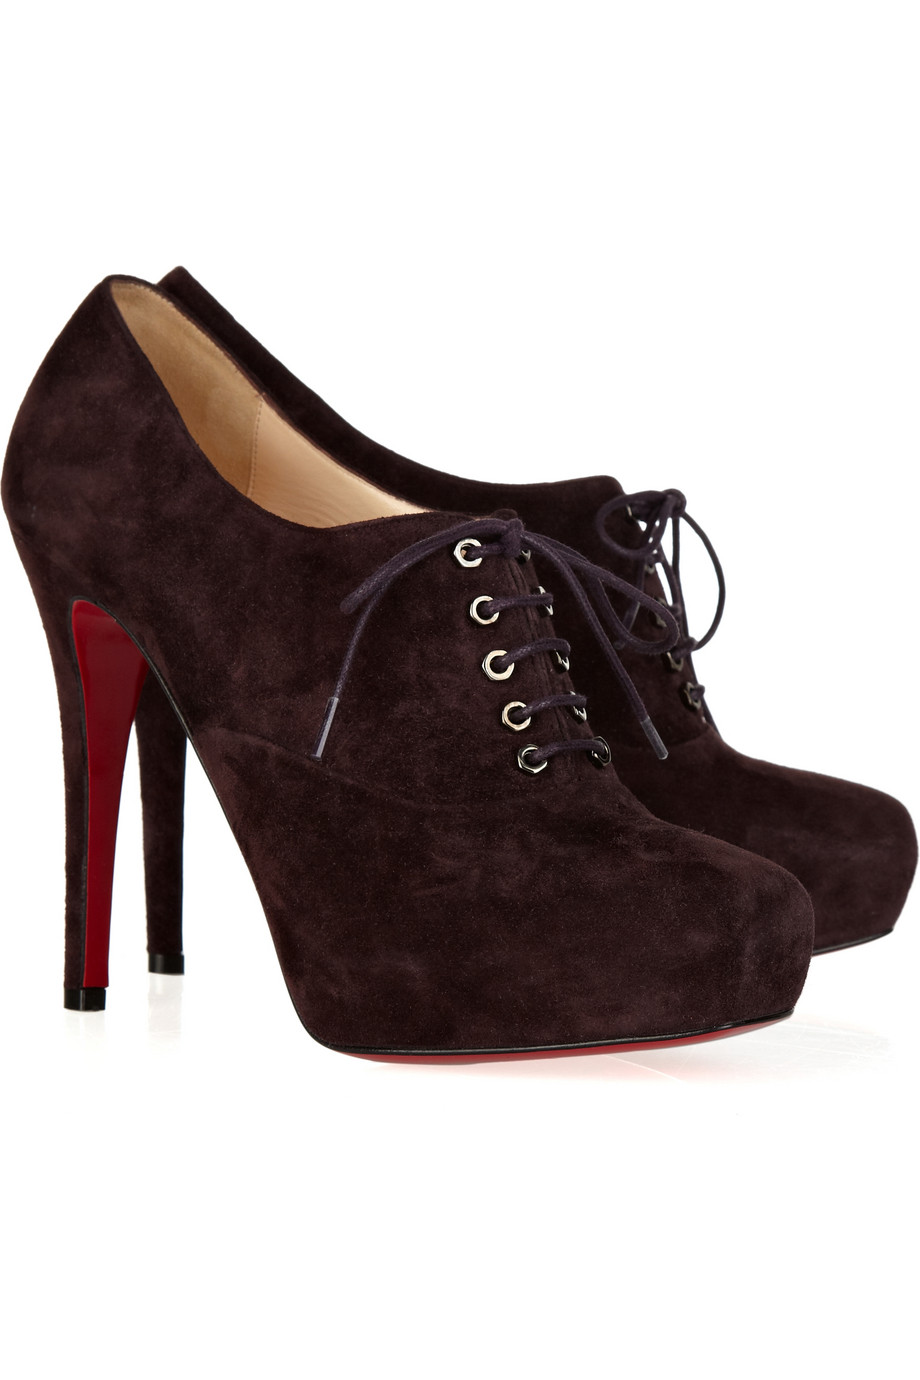 Christian Louboutin Suede Ankle Boots in Brown (purple) | Lyst